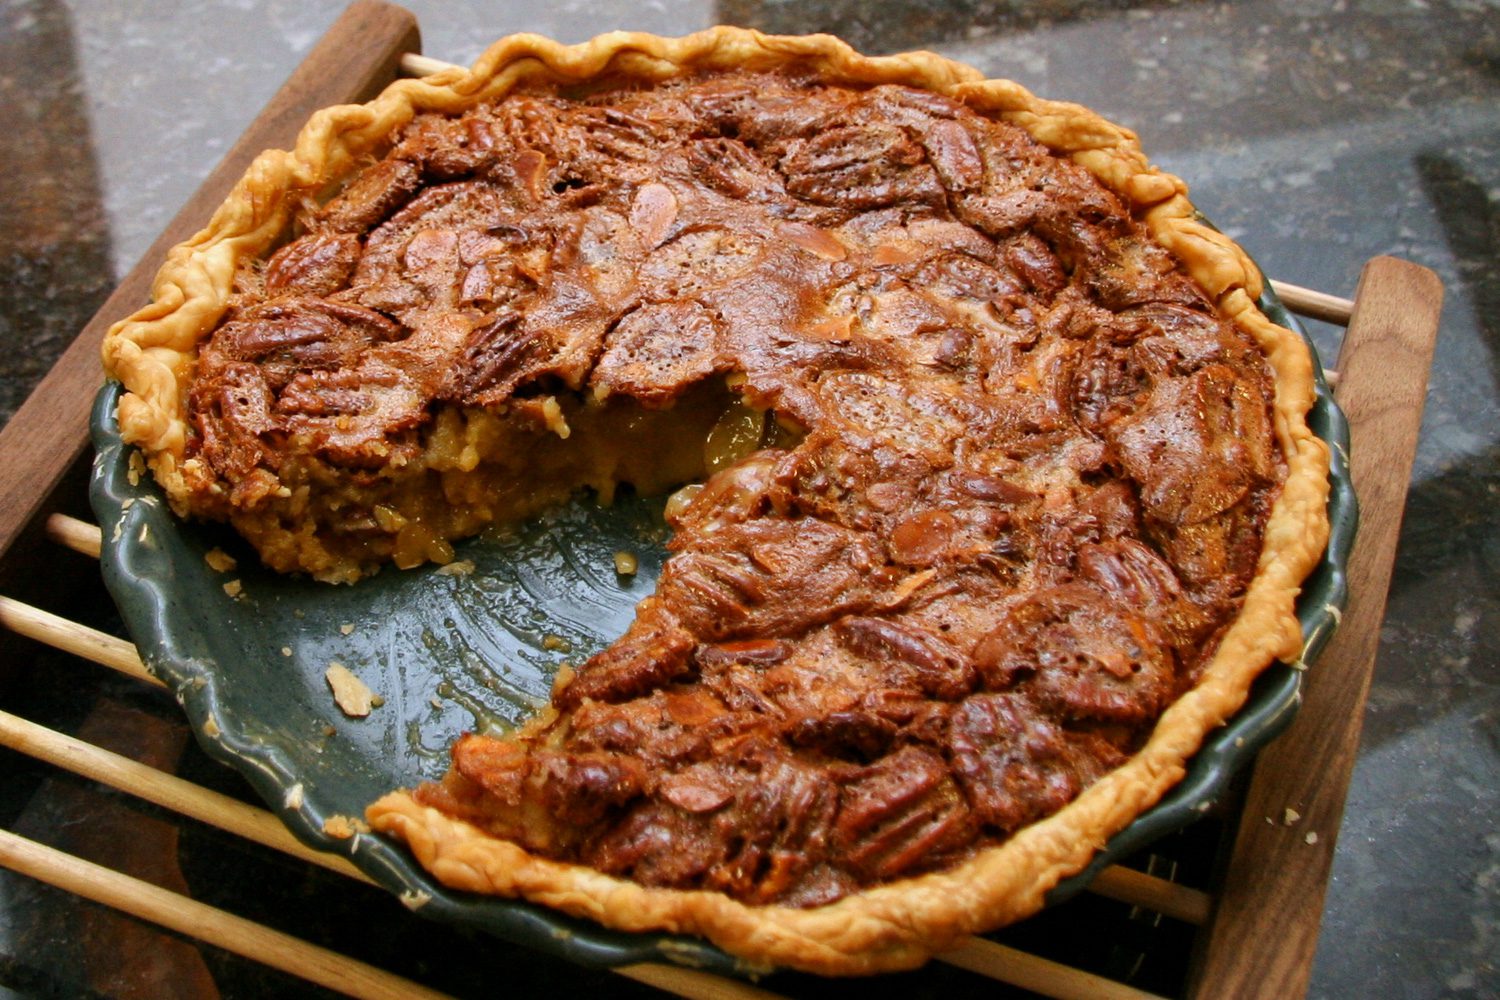 A brown sugar pecan pie, classically made with Karo corn syrup.